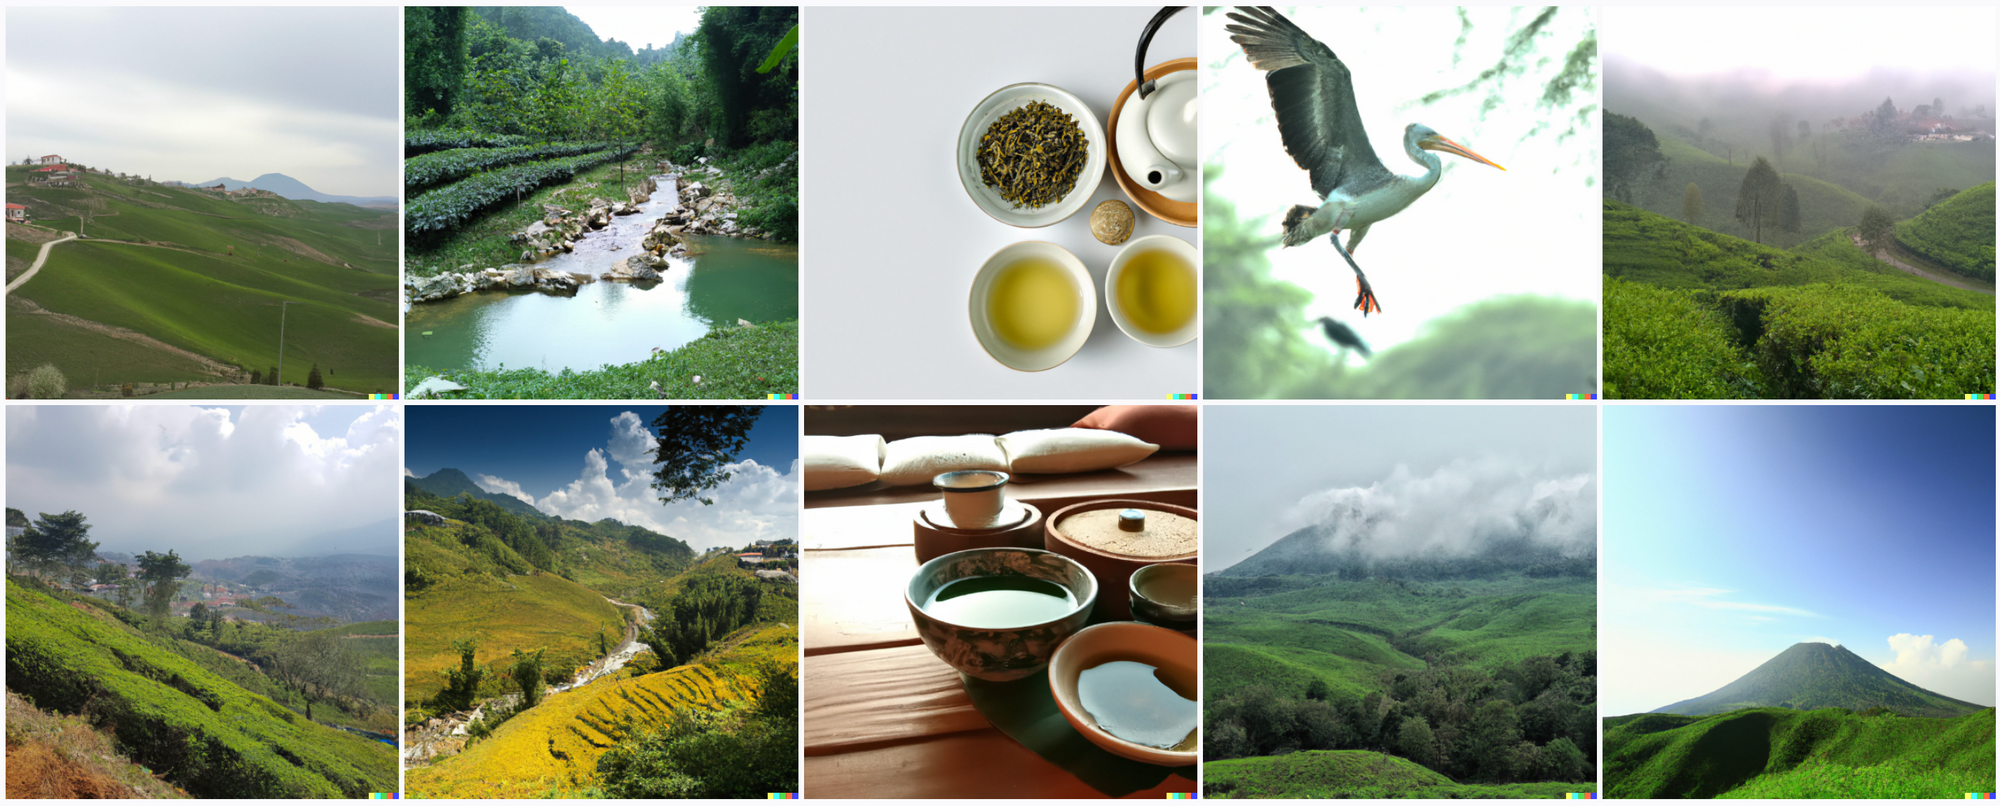 Green mountains covered in lush crops thatstrongly resemble tea, two images of tea-filled teacups, and one image of a flying stork.